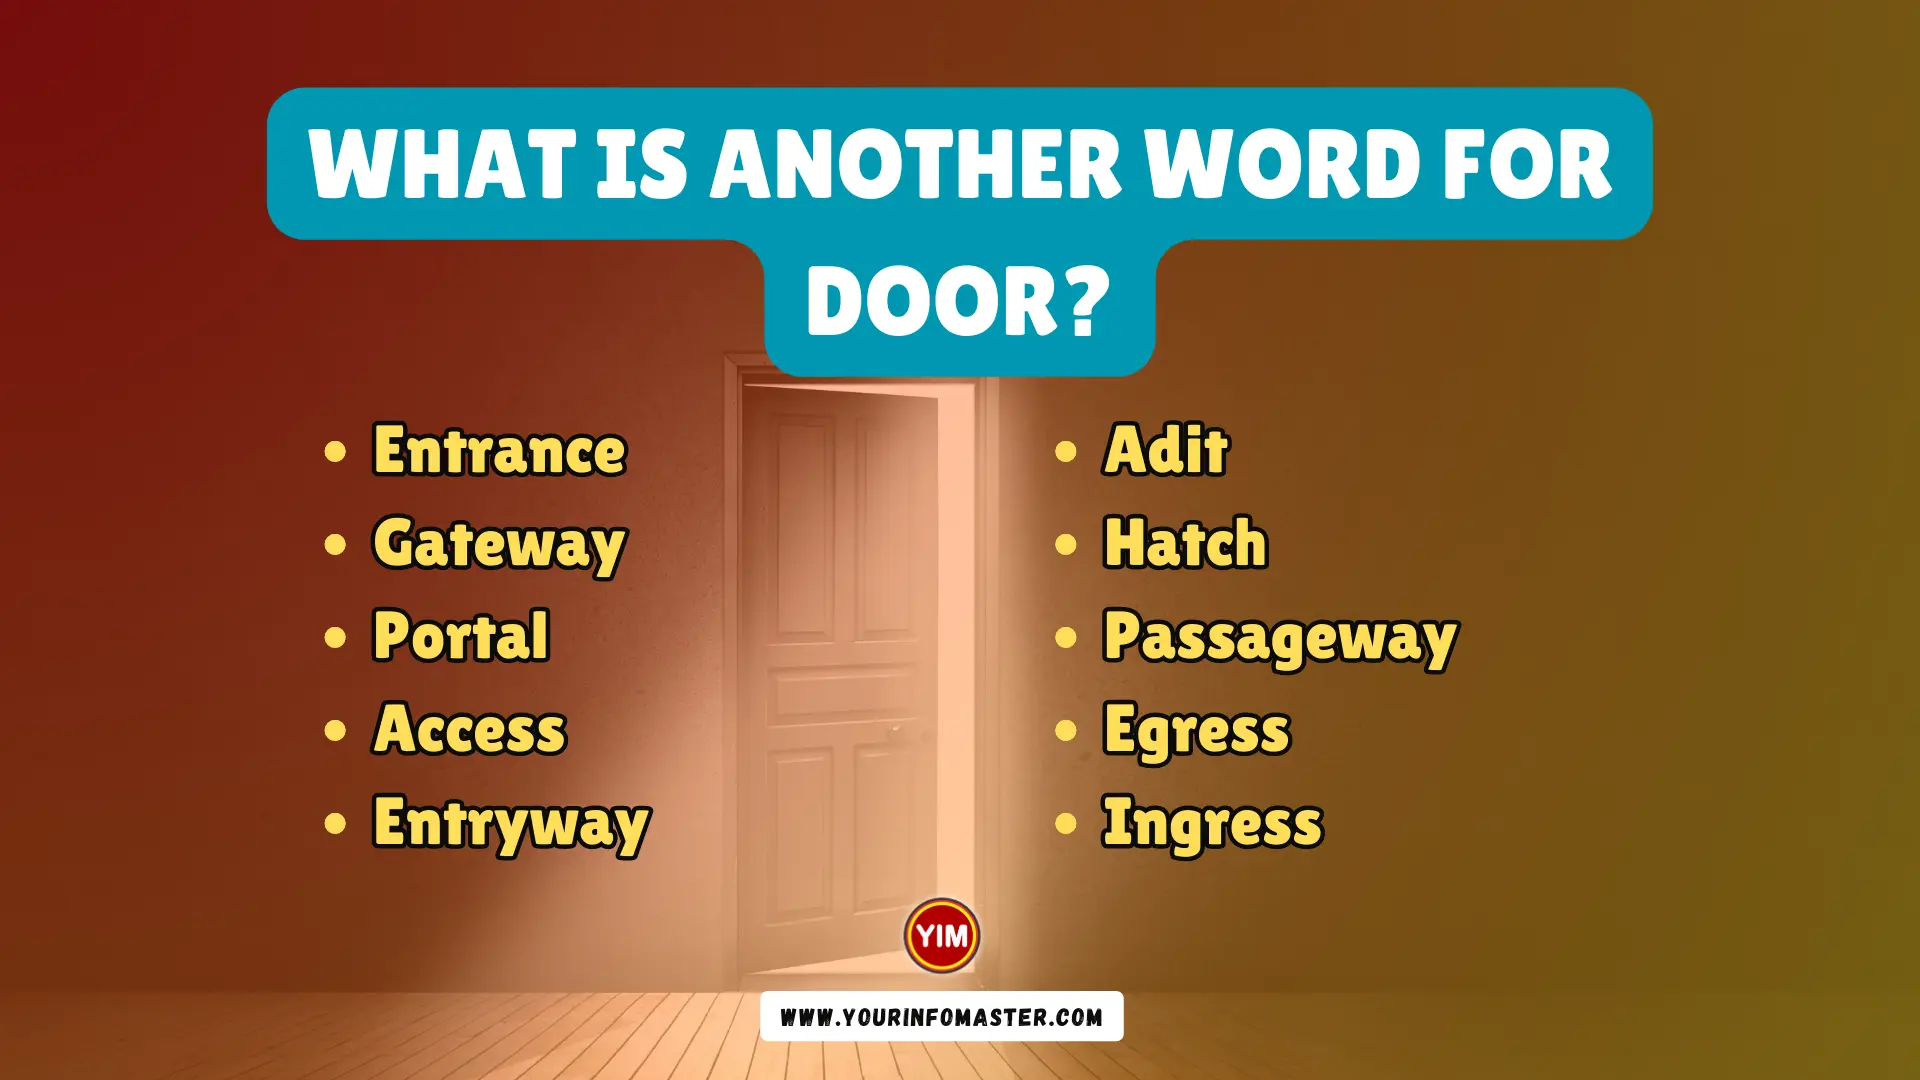 What is another word for Door